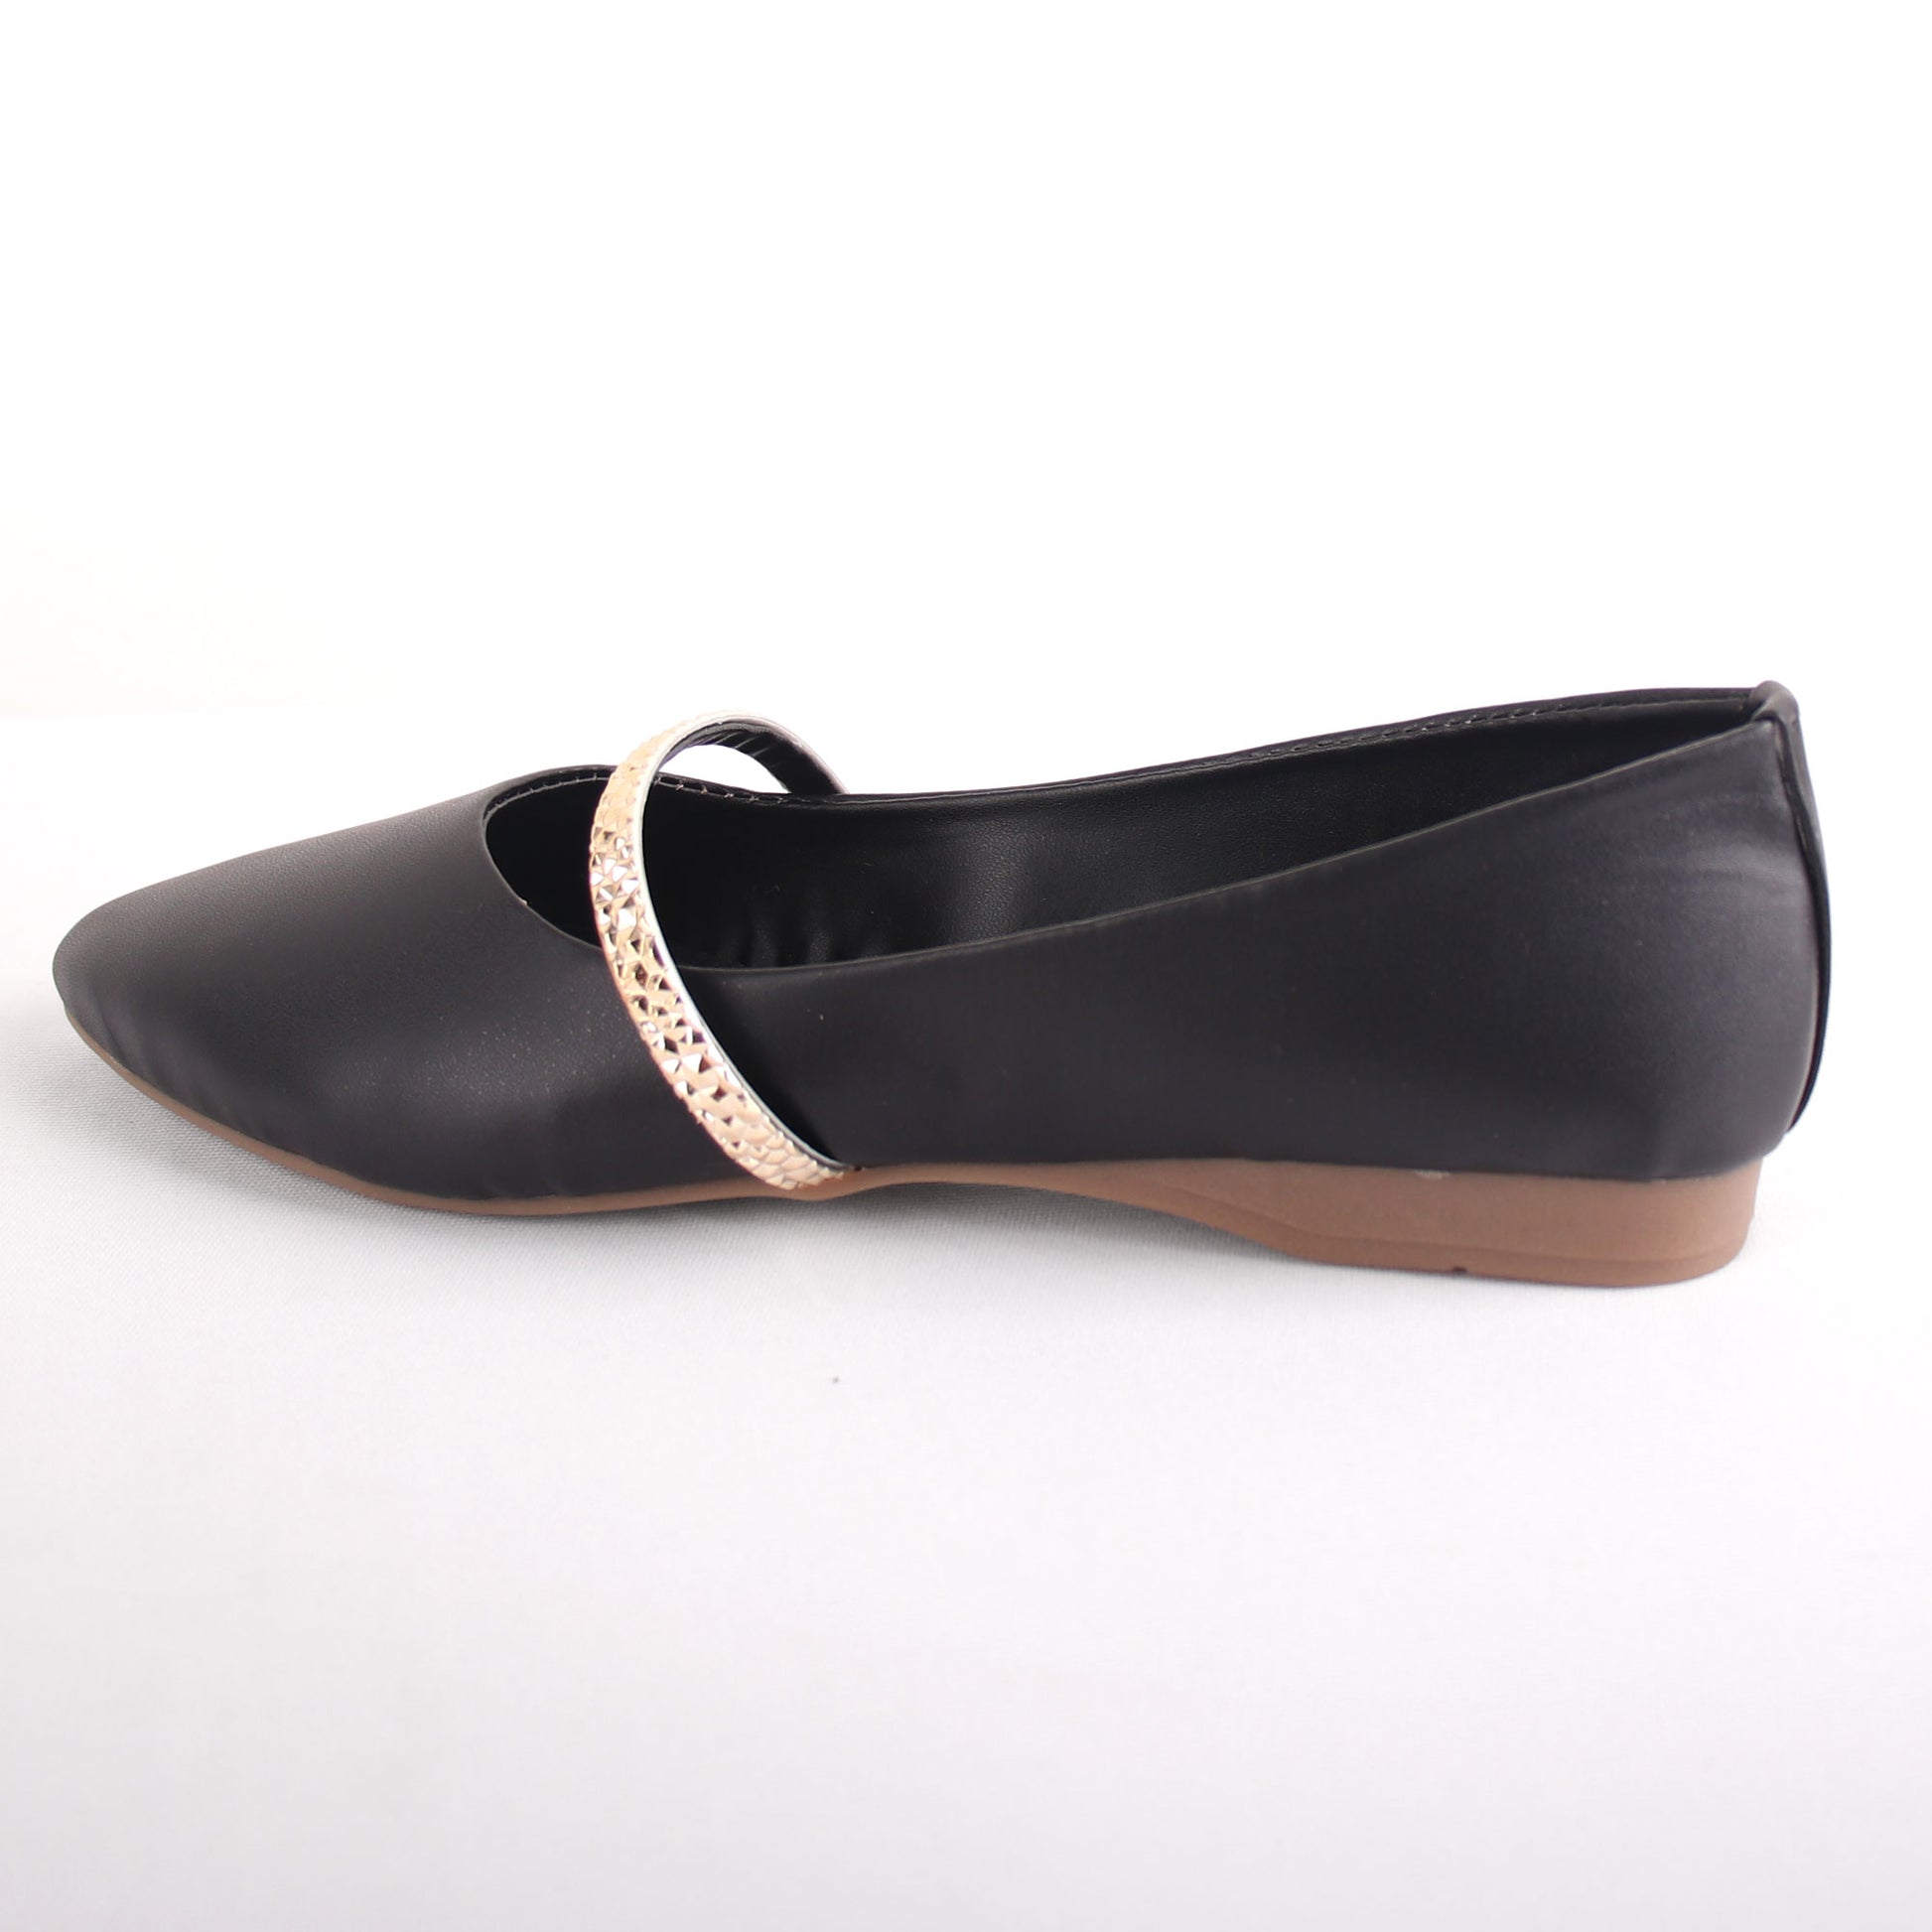 Foot Wear,The Ornamented string Black Belly - Cippele Multi Store